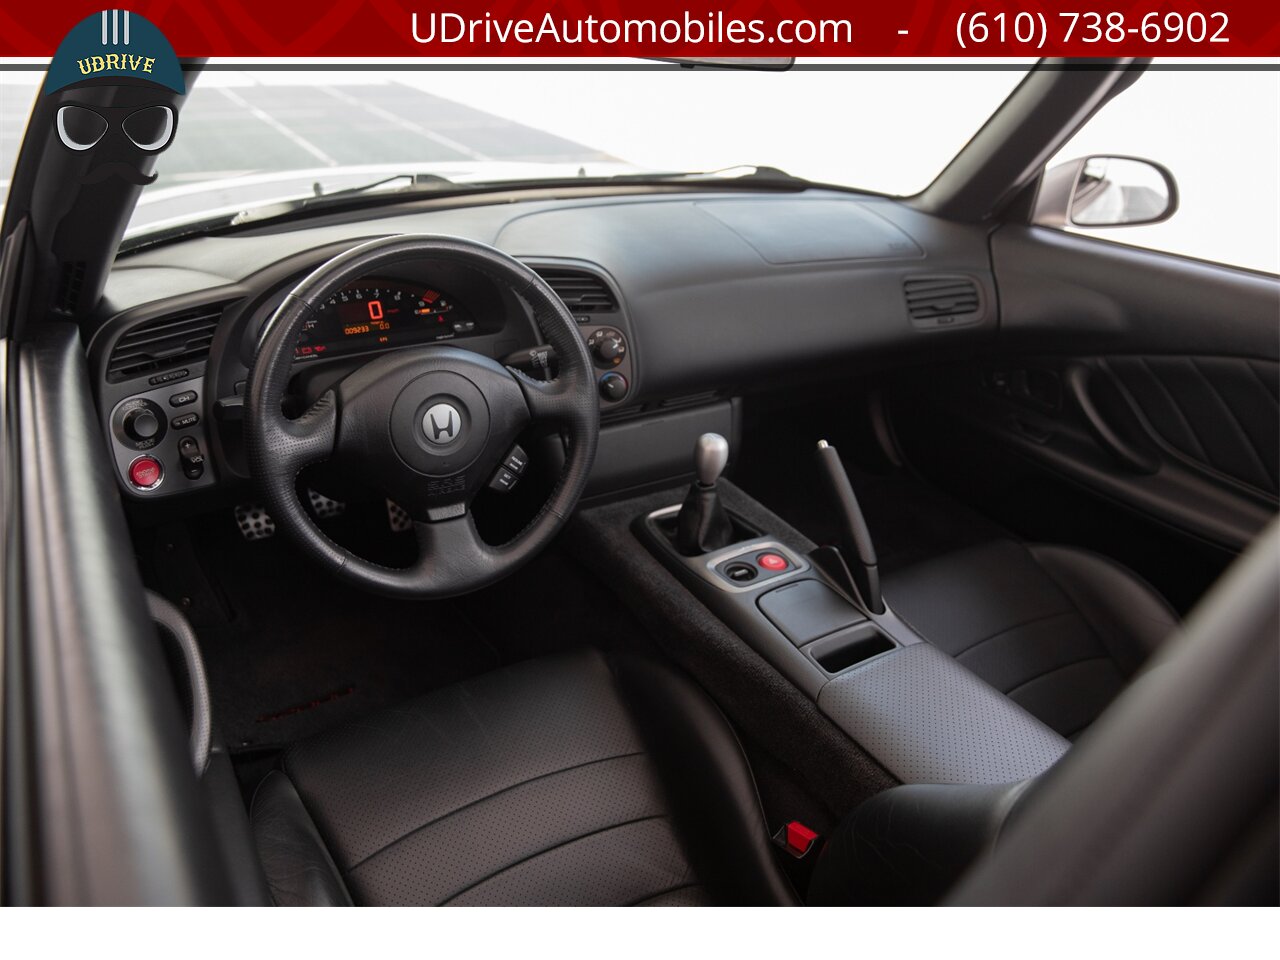 2001 Honda S2000 9k Miles Same Owner Since 2001 Service History   - Photo 27 - West Chester, PA 19382